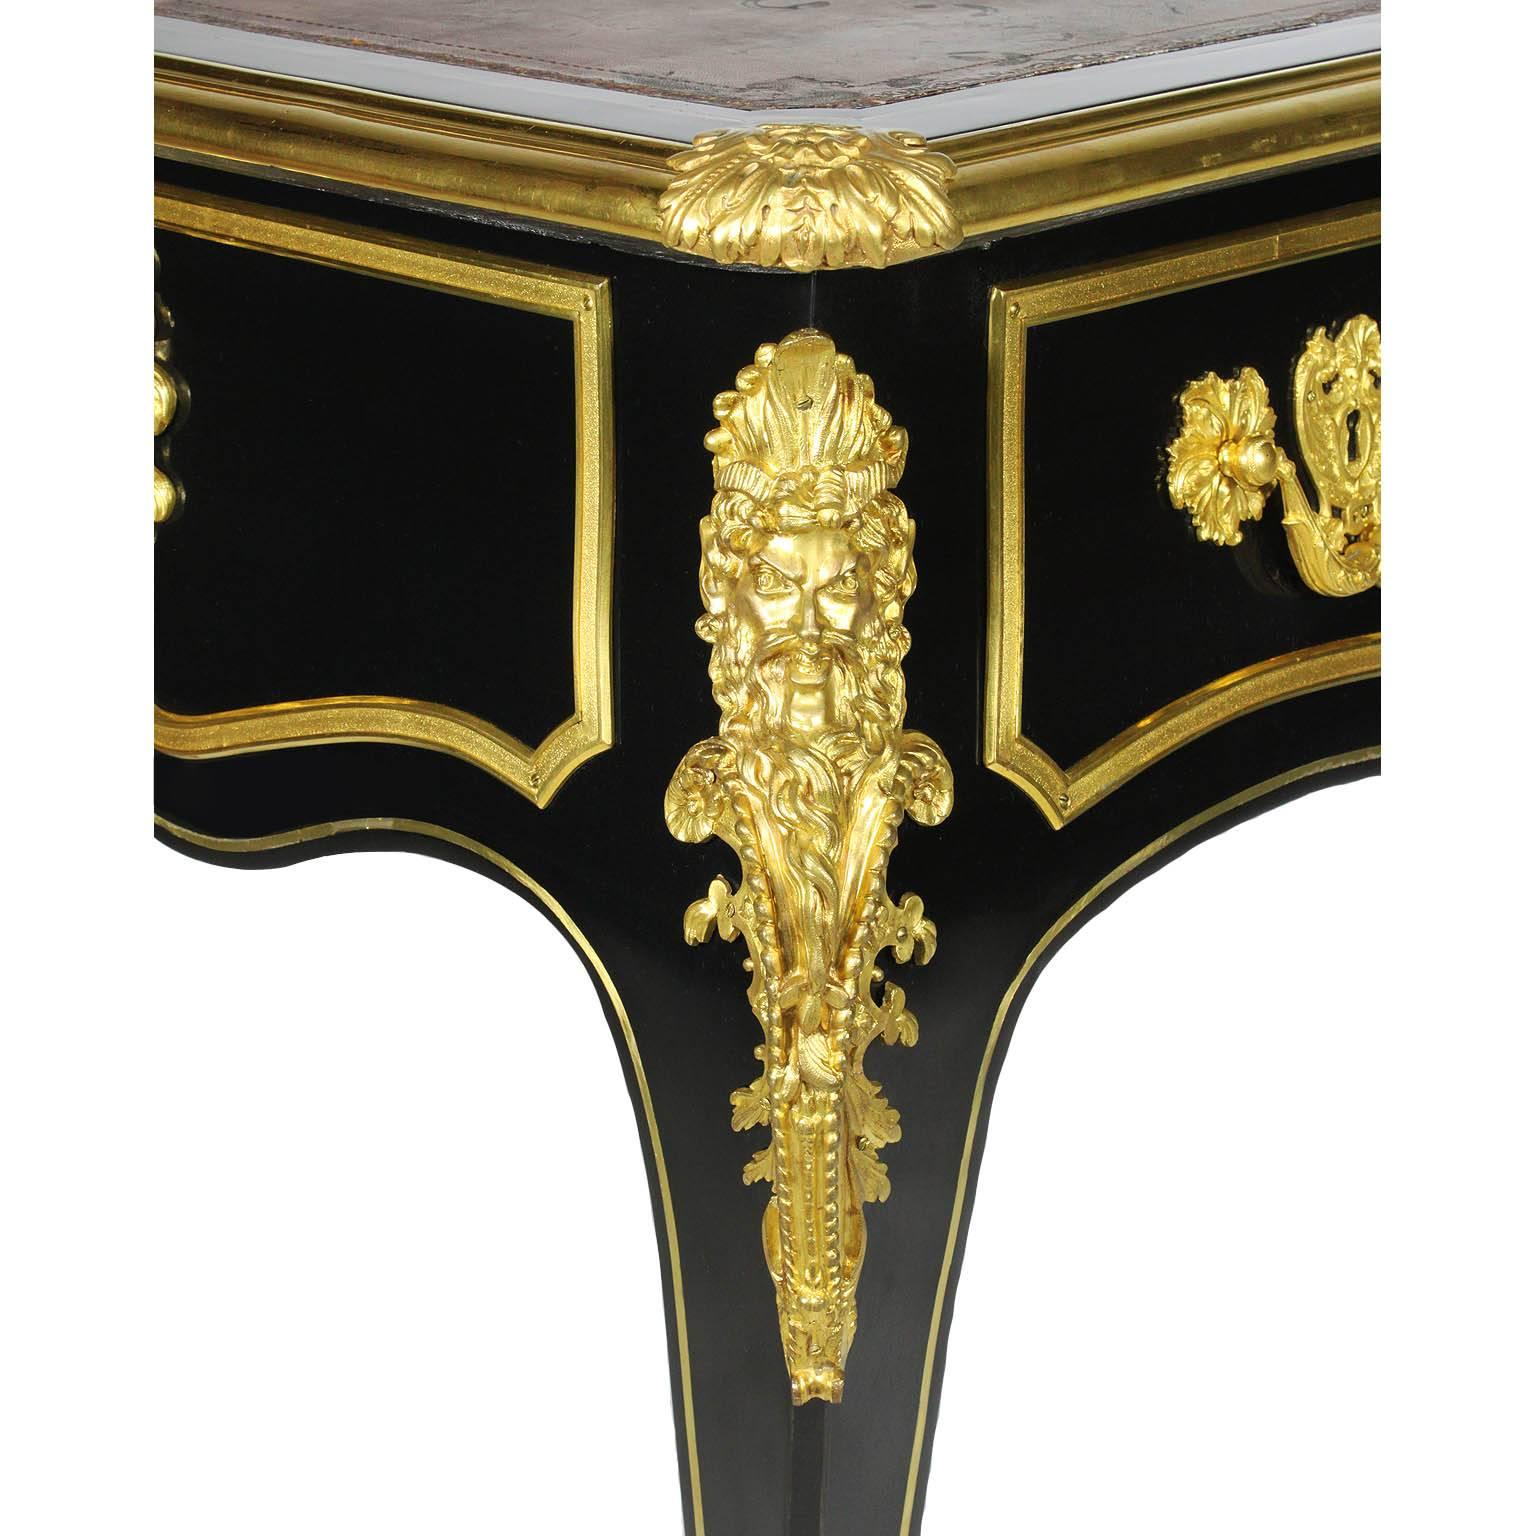 French 19th Century Louis XV Style Ebonized Wood and Gilt Bronze-Mounted Desk For Sale 3